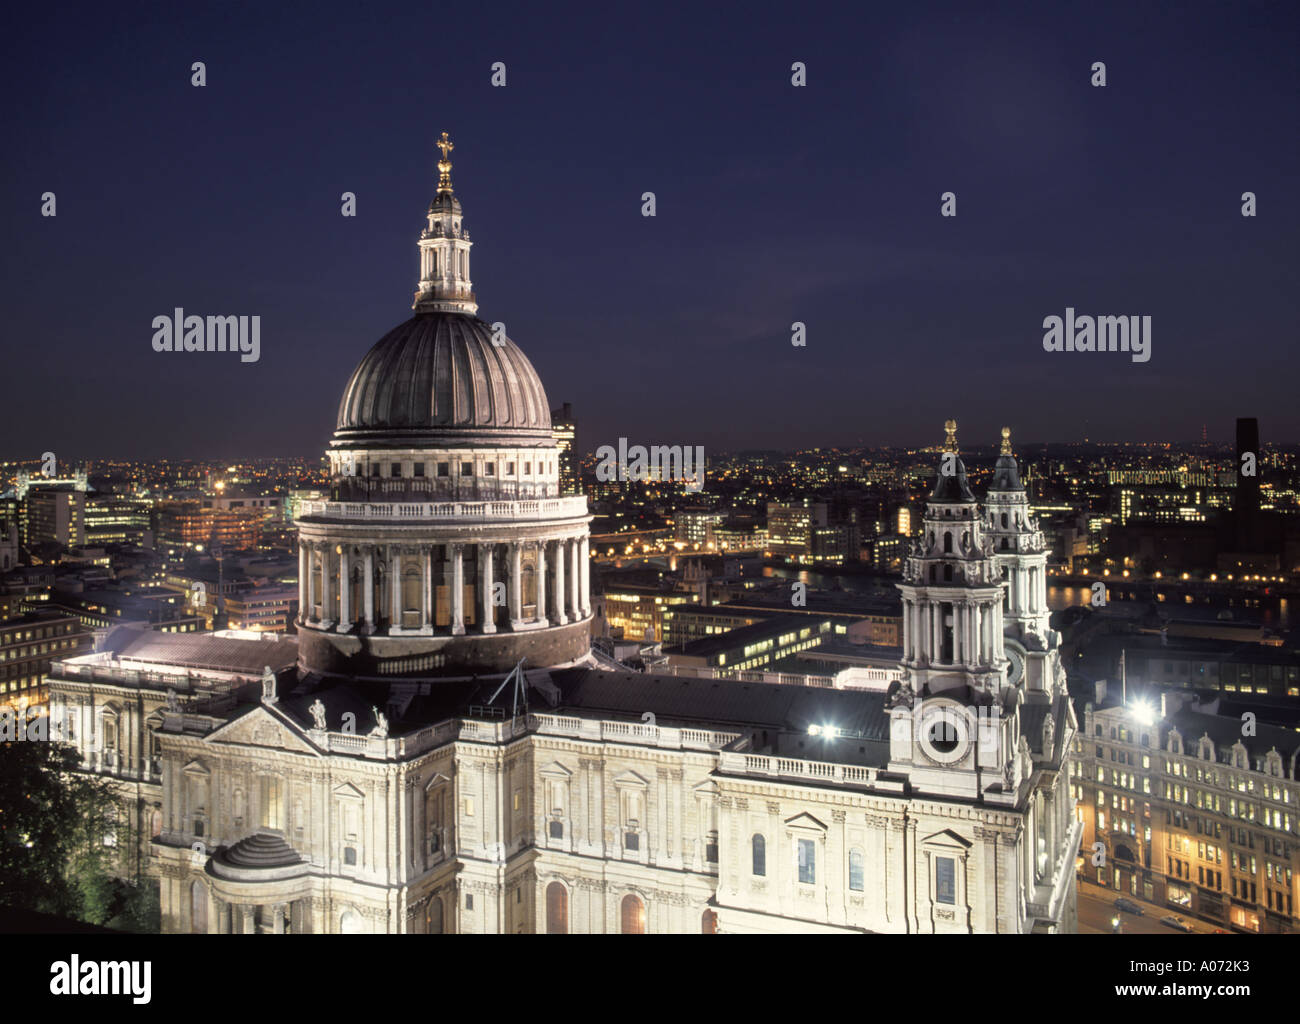 Iconic St Pauls historical cathedral Church of England religion Christopher Wren dome at dusk aerial view from above looking down on City of London UK Stock Photo